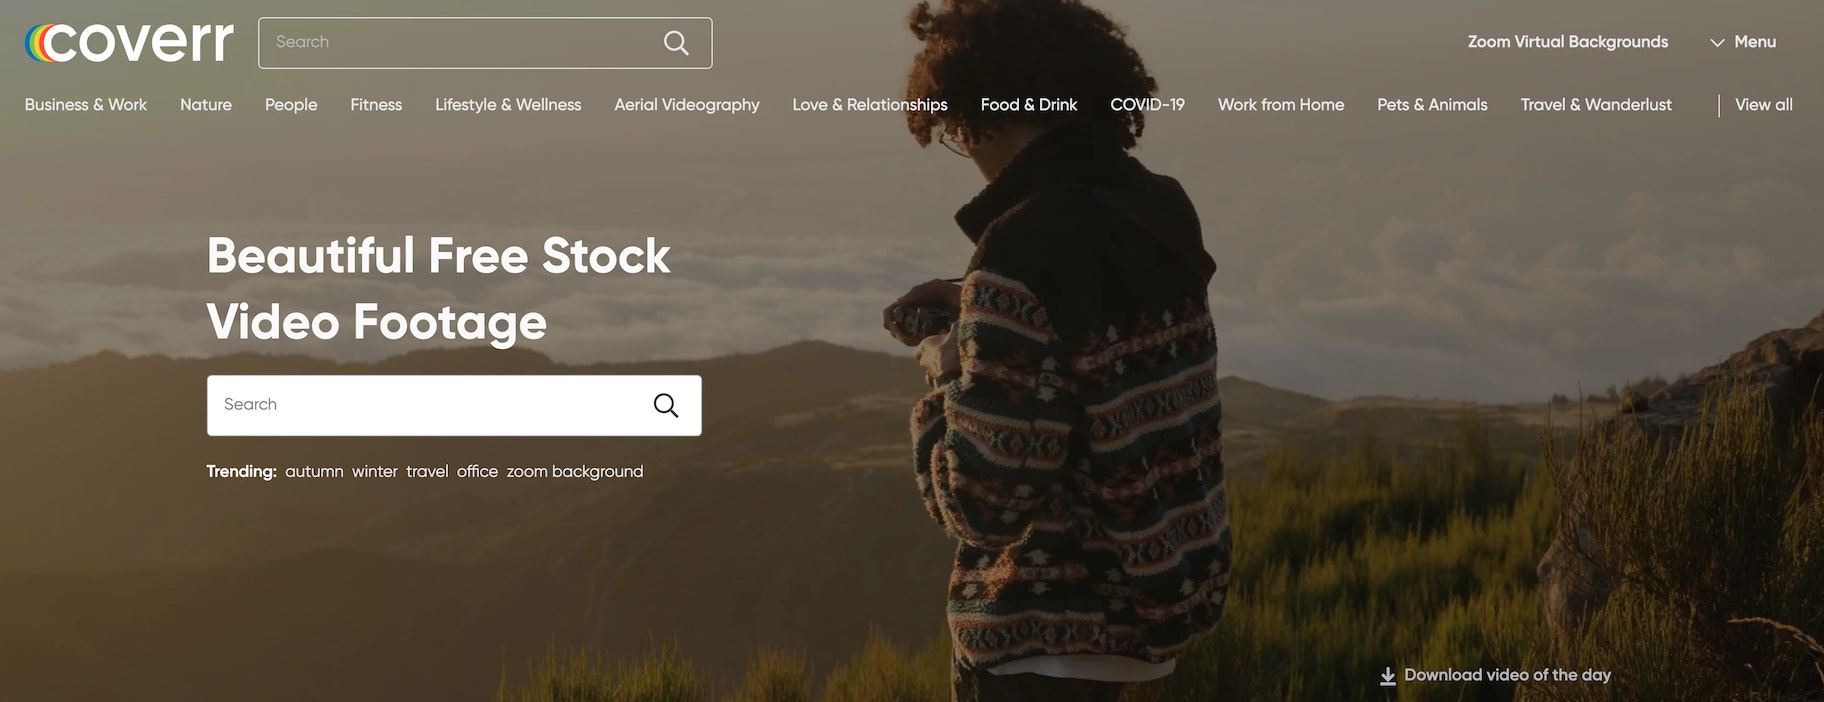 coverr free stock video site